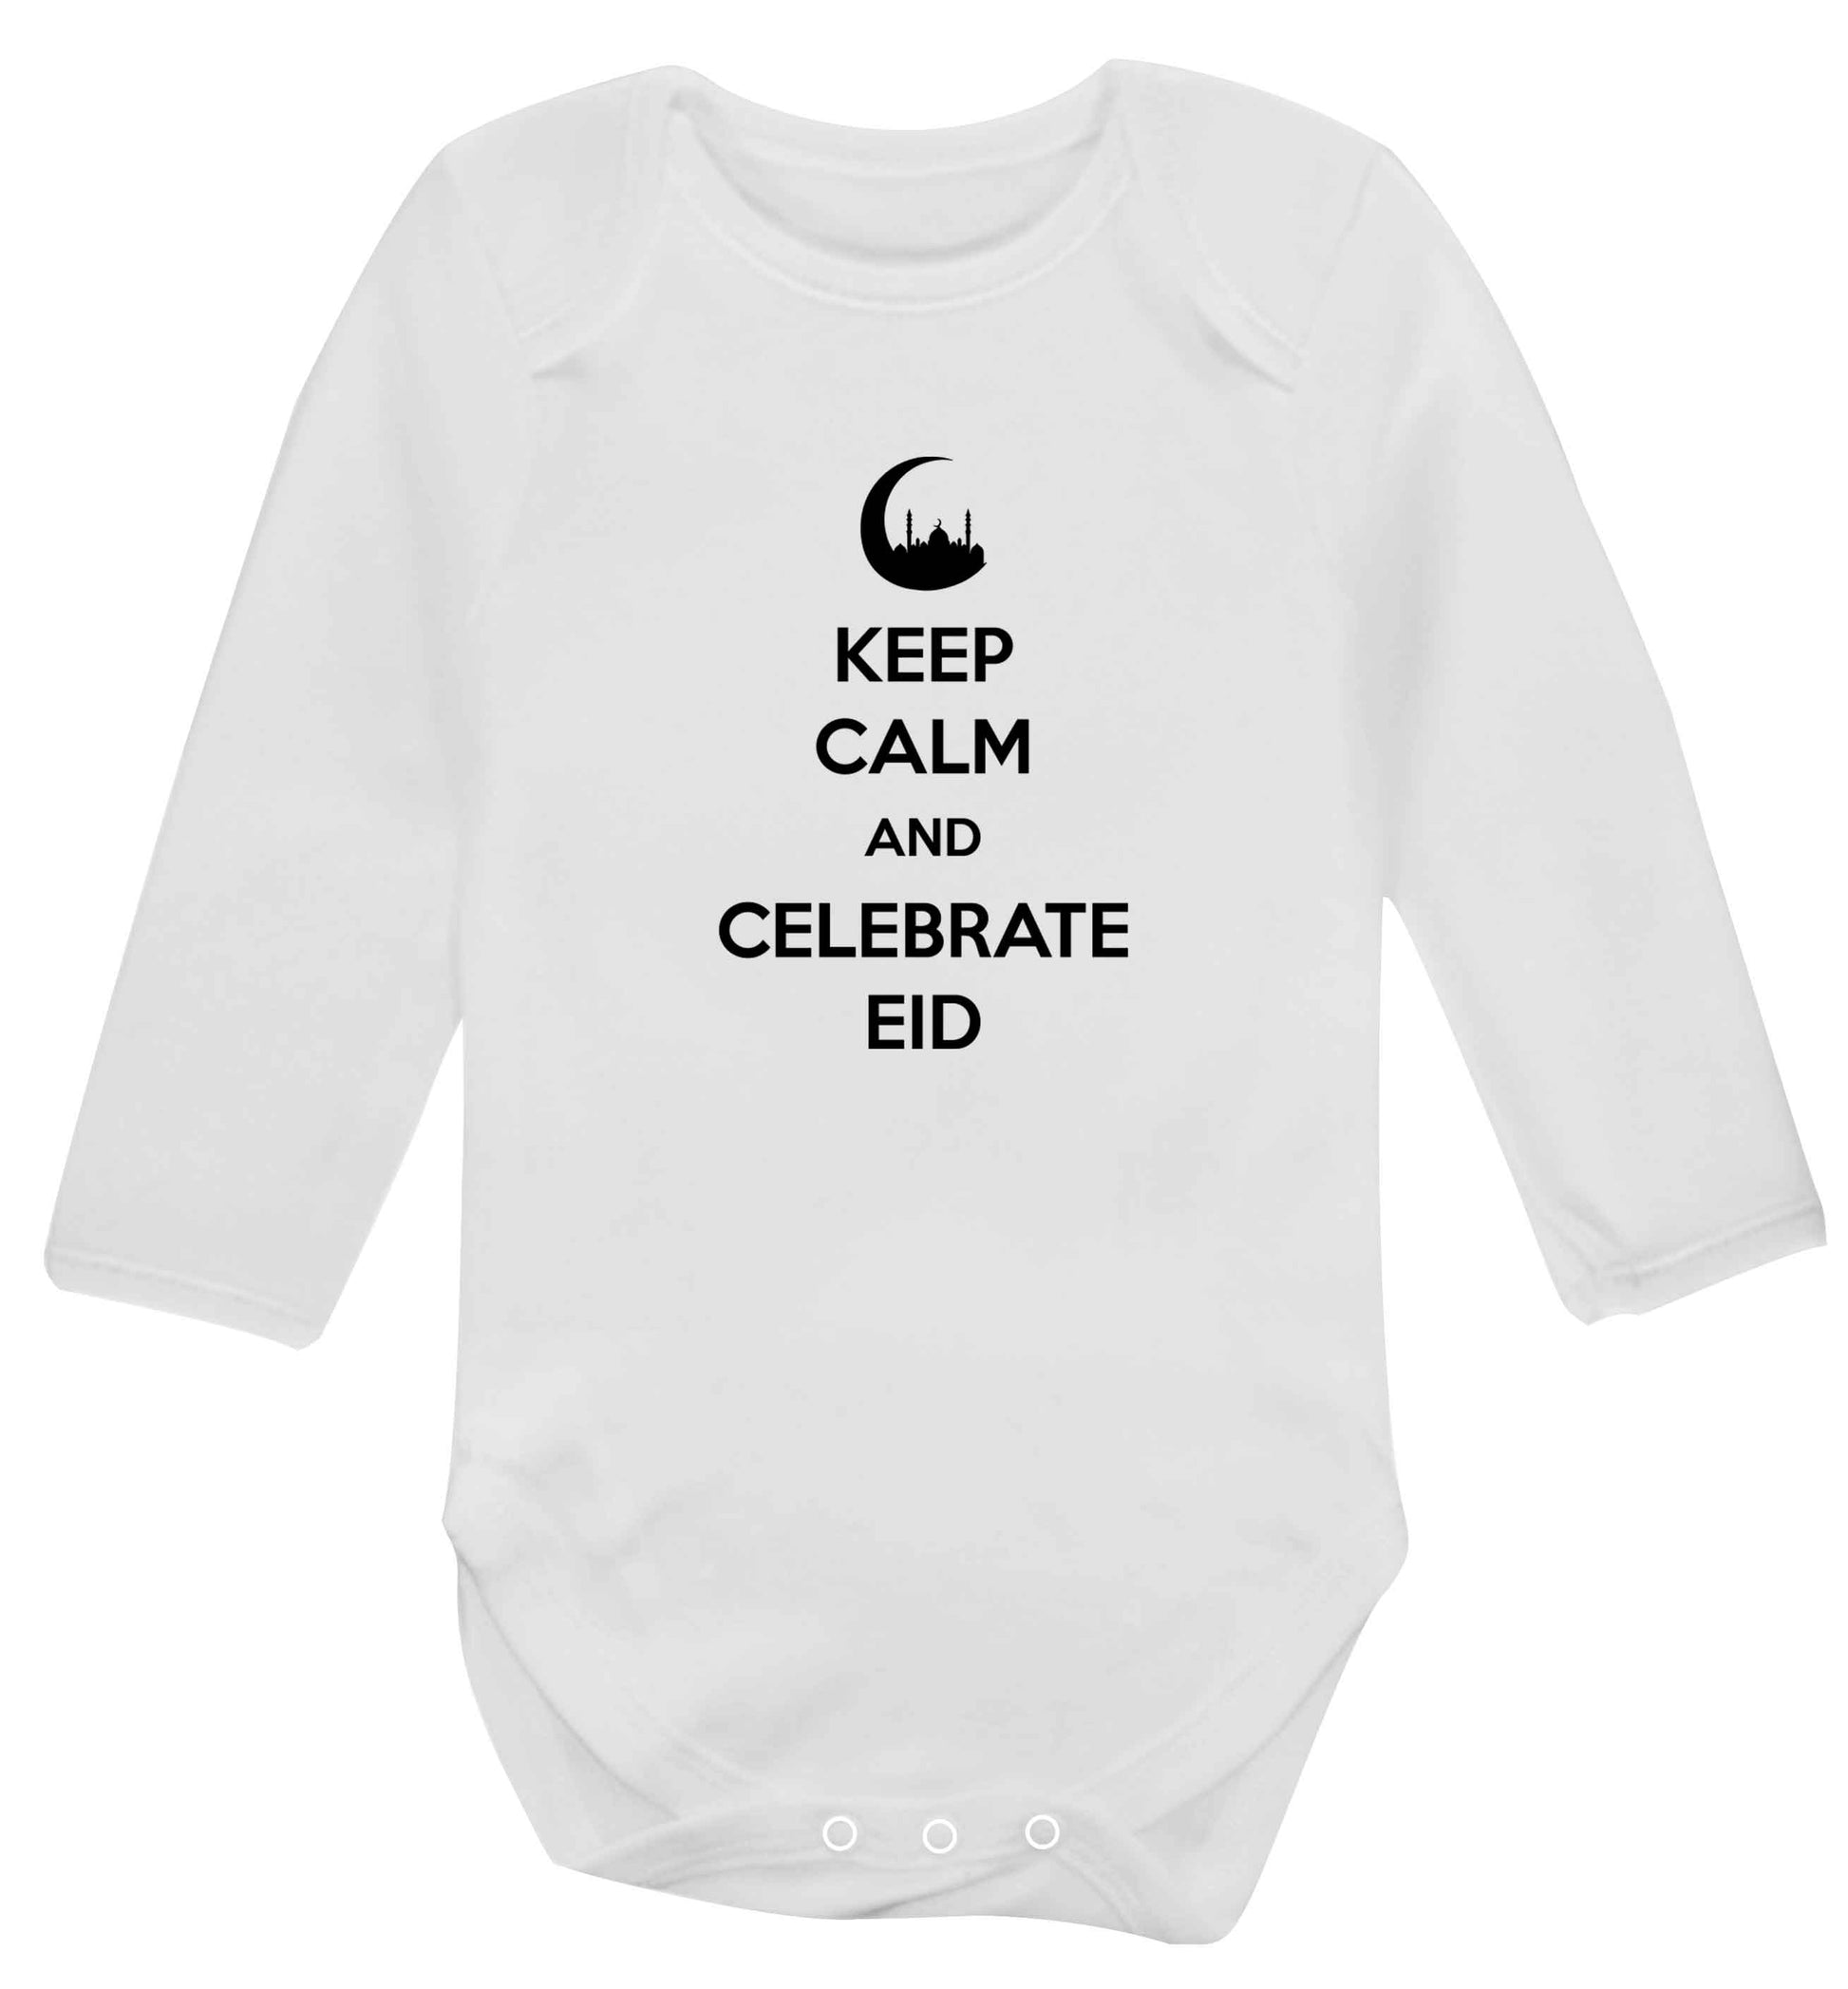 Keep calm and celebrate Eid baby vest long sleeved white 6-12 months